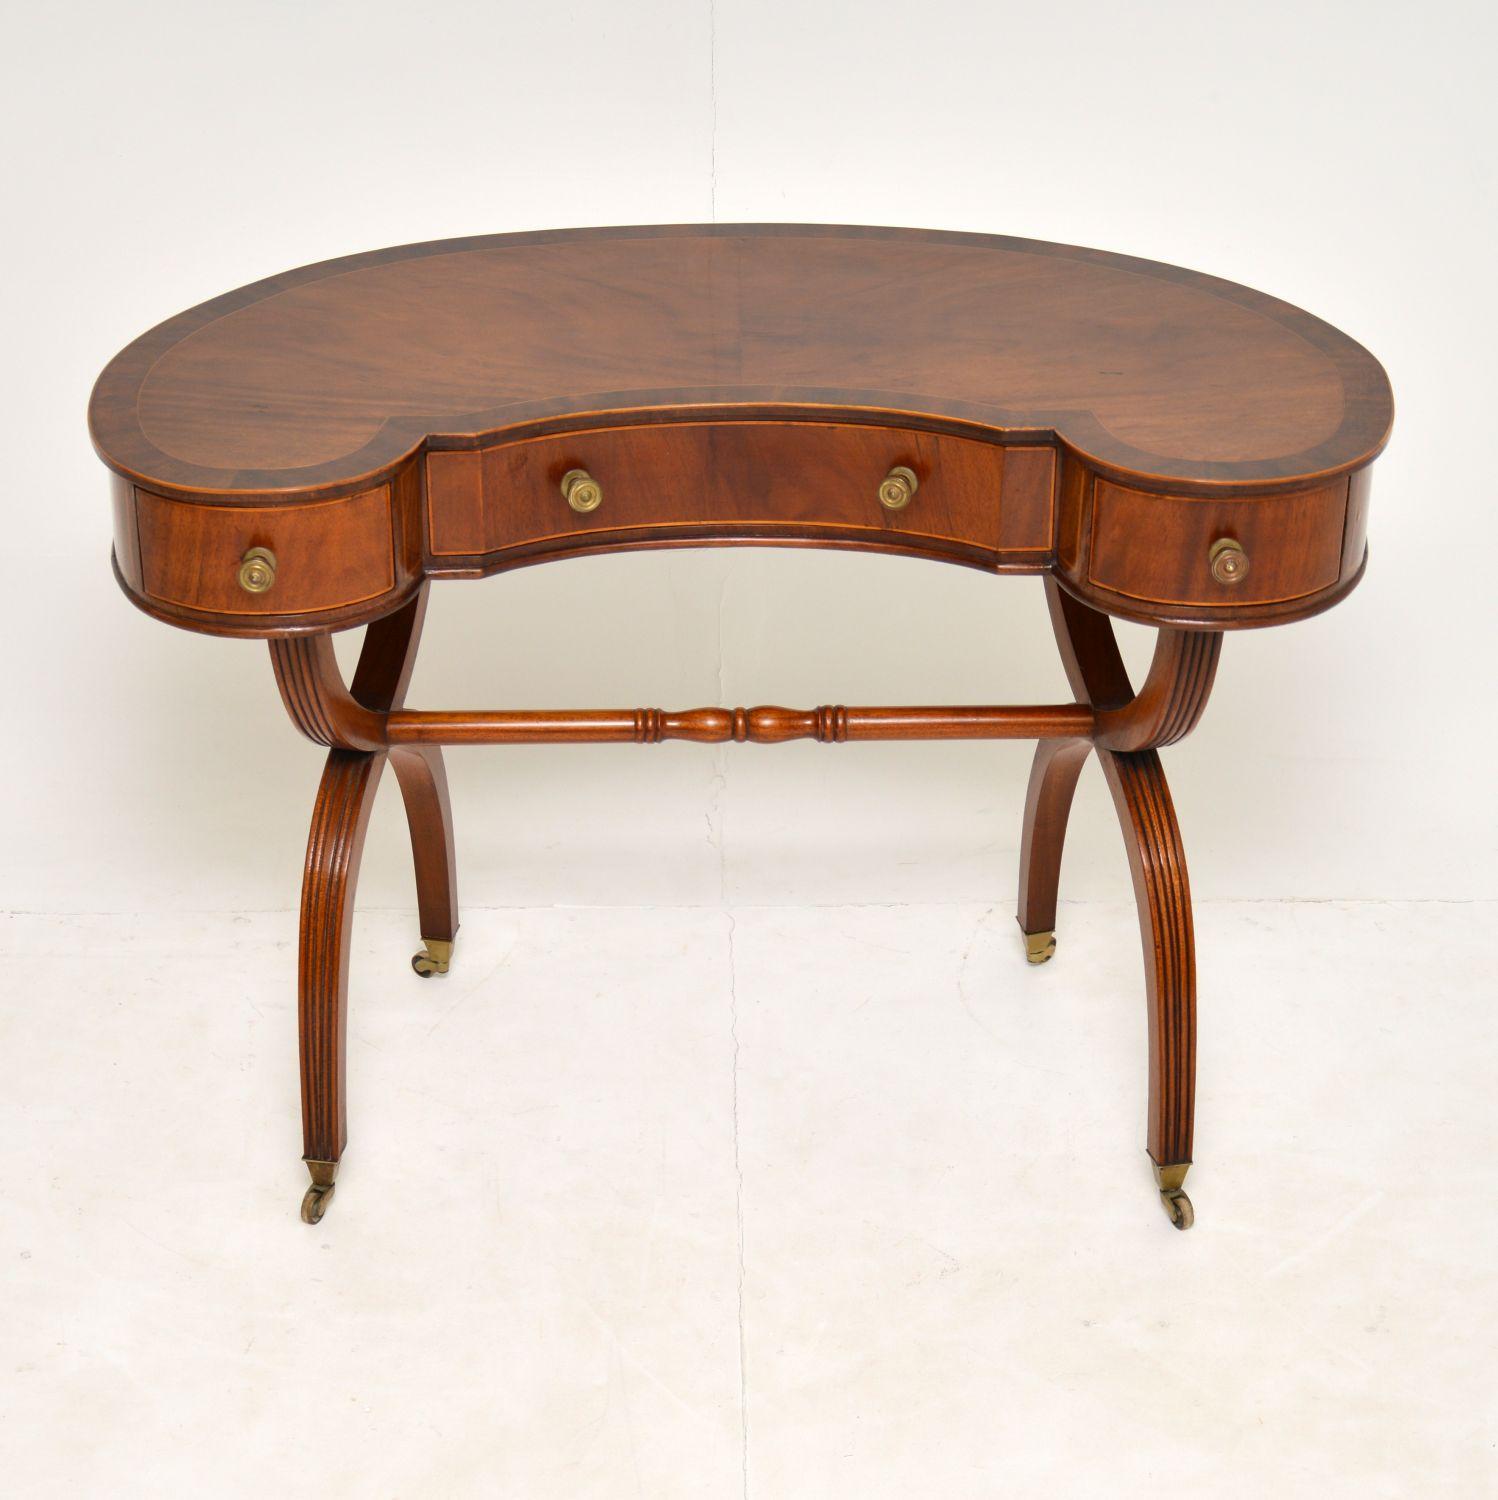 A gorgeous antique kidney table in the Regency style, this dates from around the 1910-20’s. It is a great size to be used as either a desk or a dressing table.

This has a beautiful design and is of wonderful quality. The shape and design is